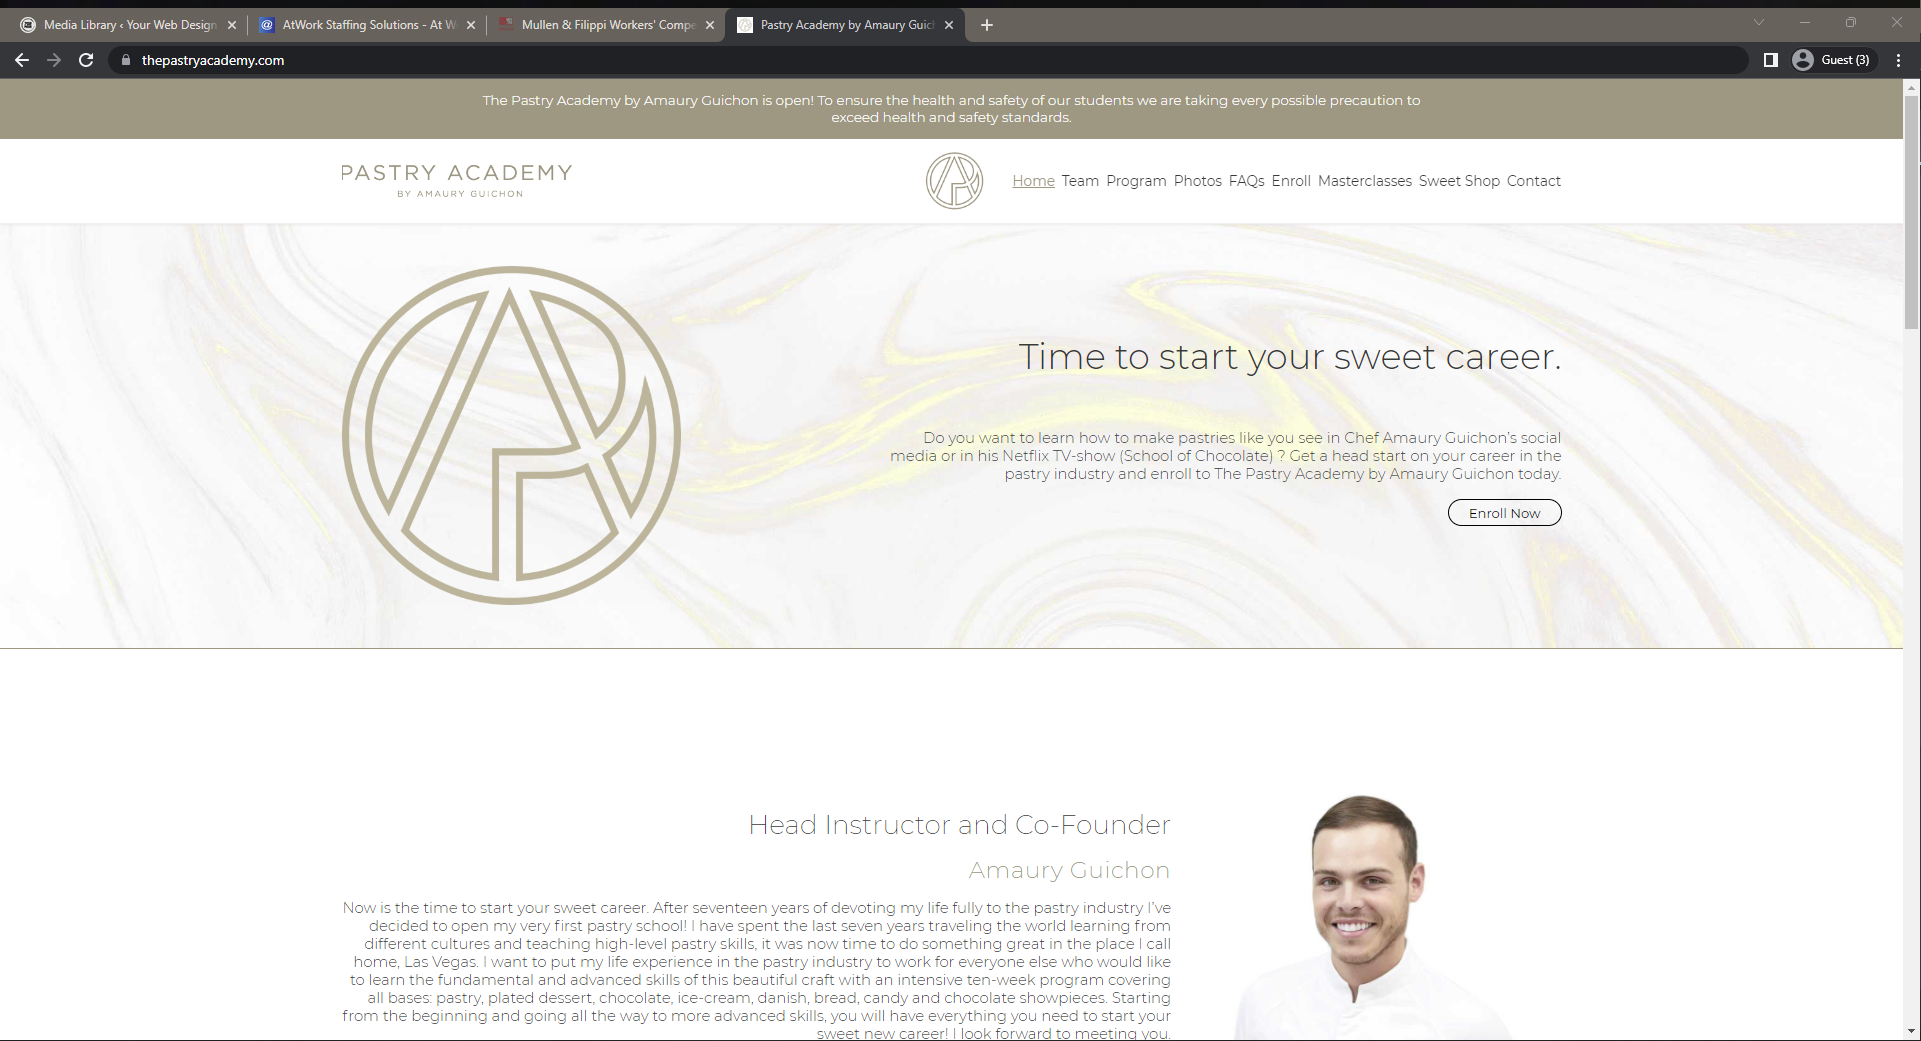 The Pastry Academy Website Design by 702 Pros - WordPress SEO Henderson, NV